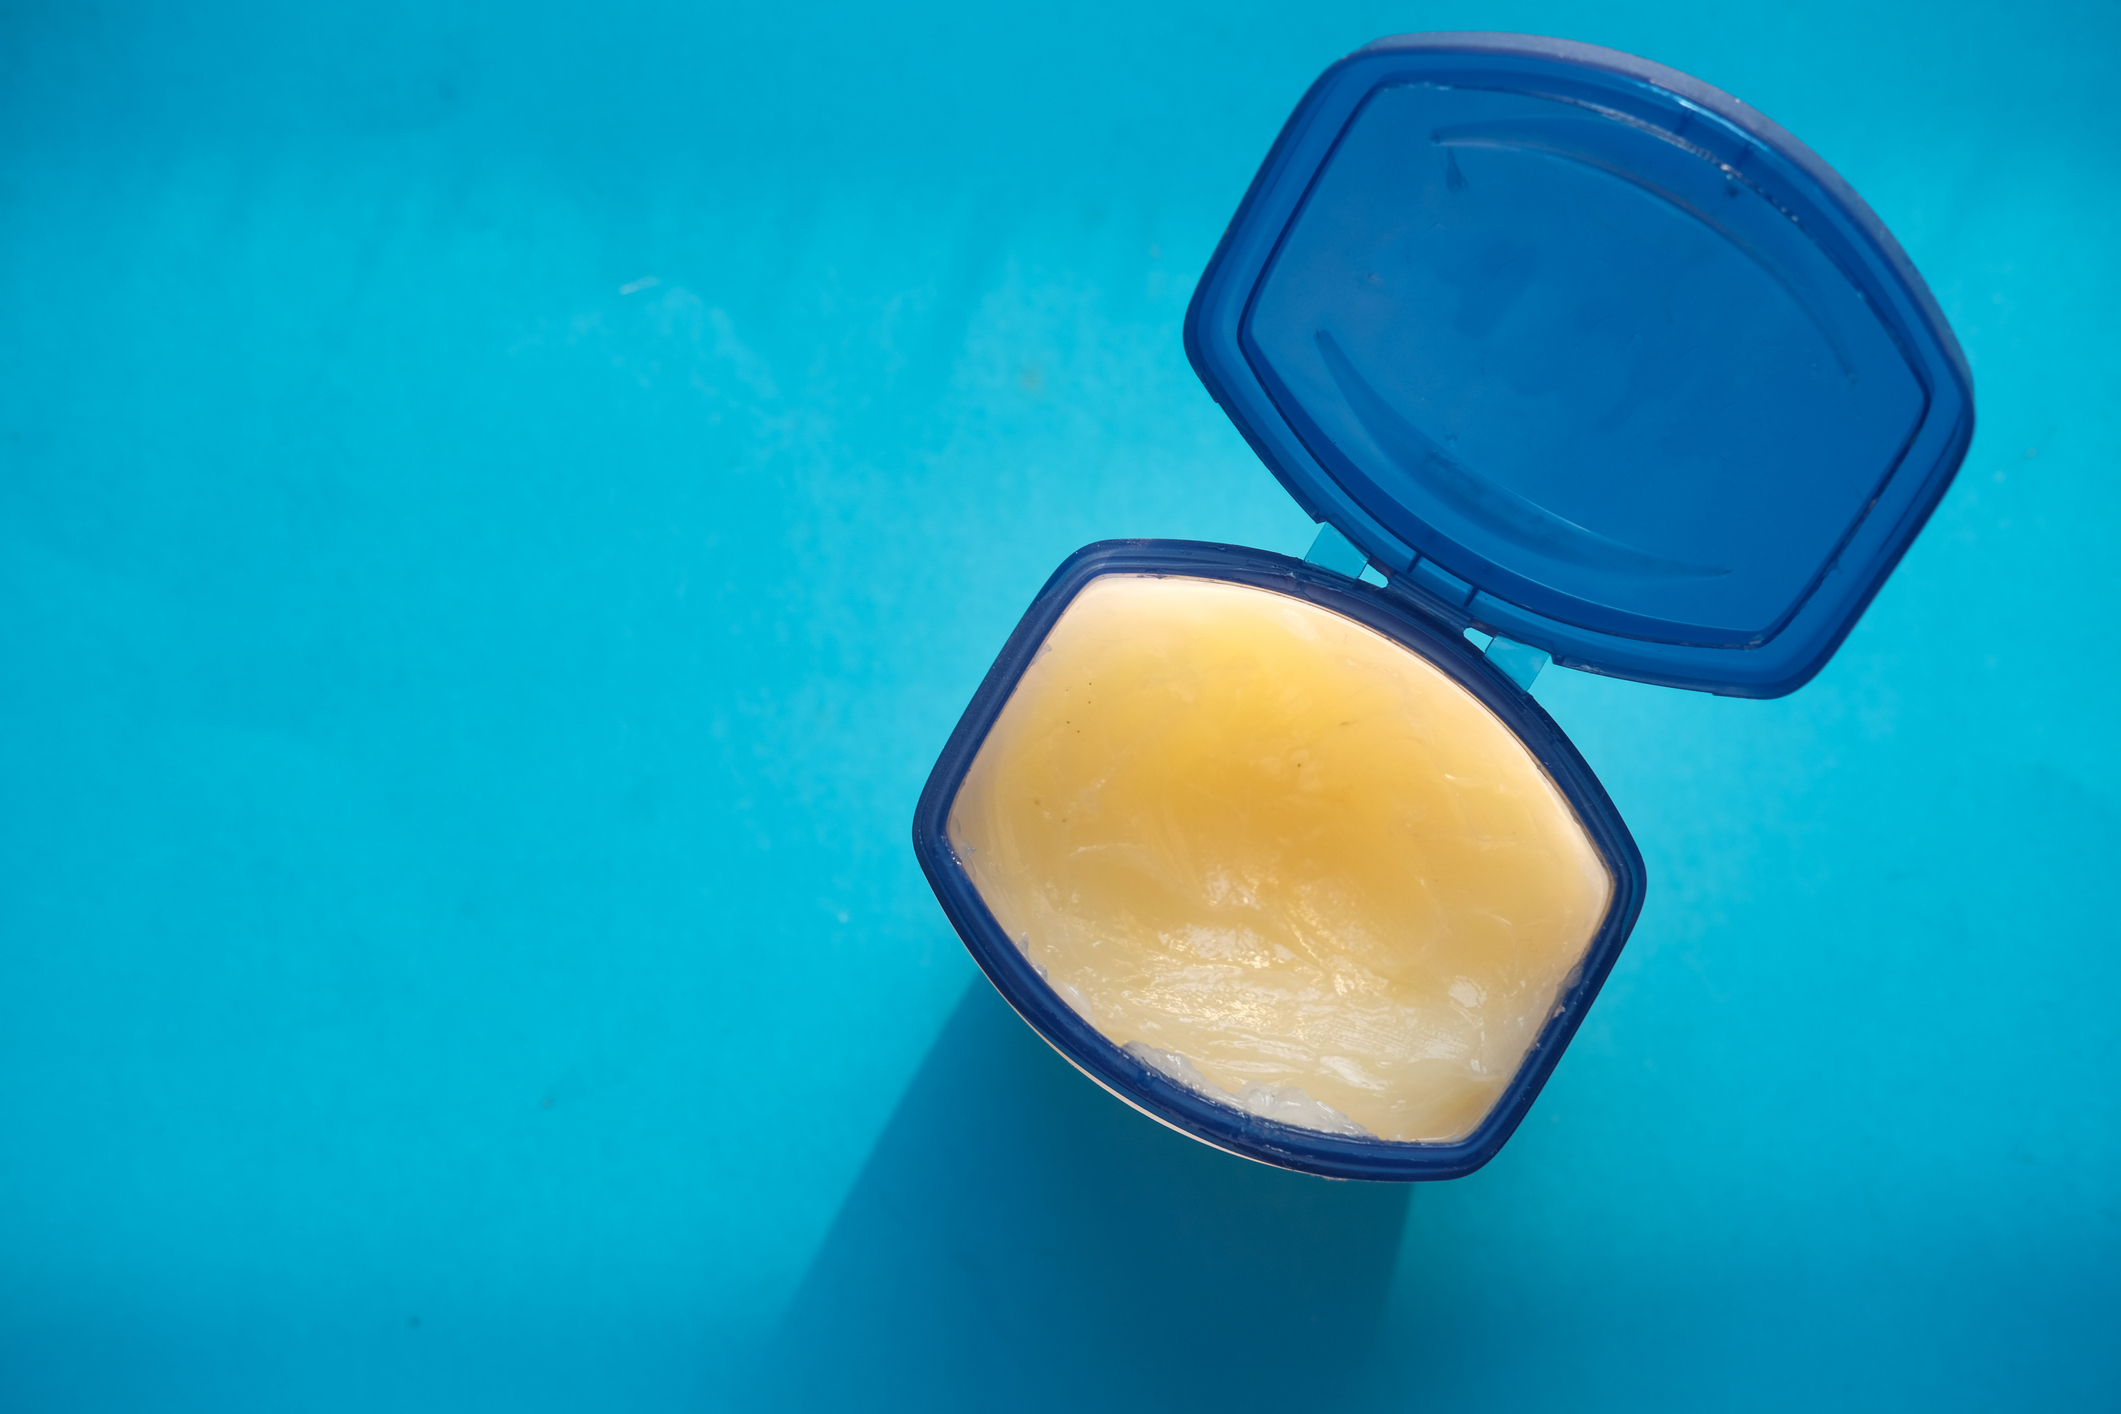 Can petroleum jelly expire? Everything you need to know